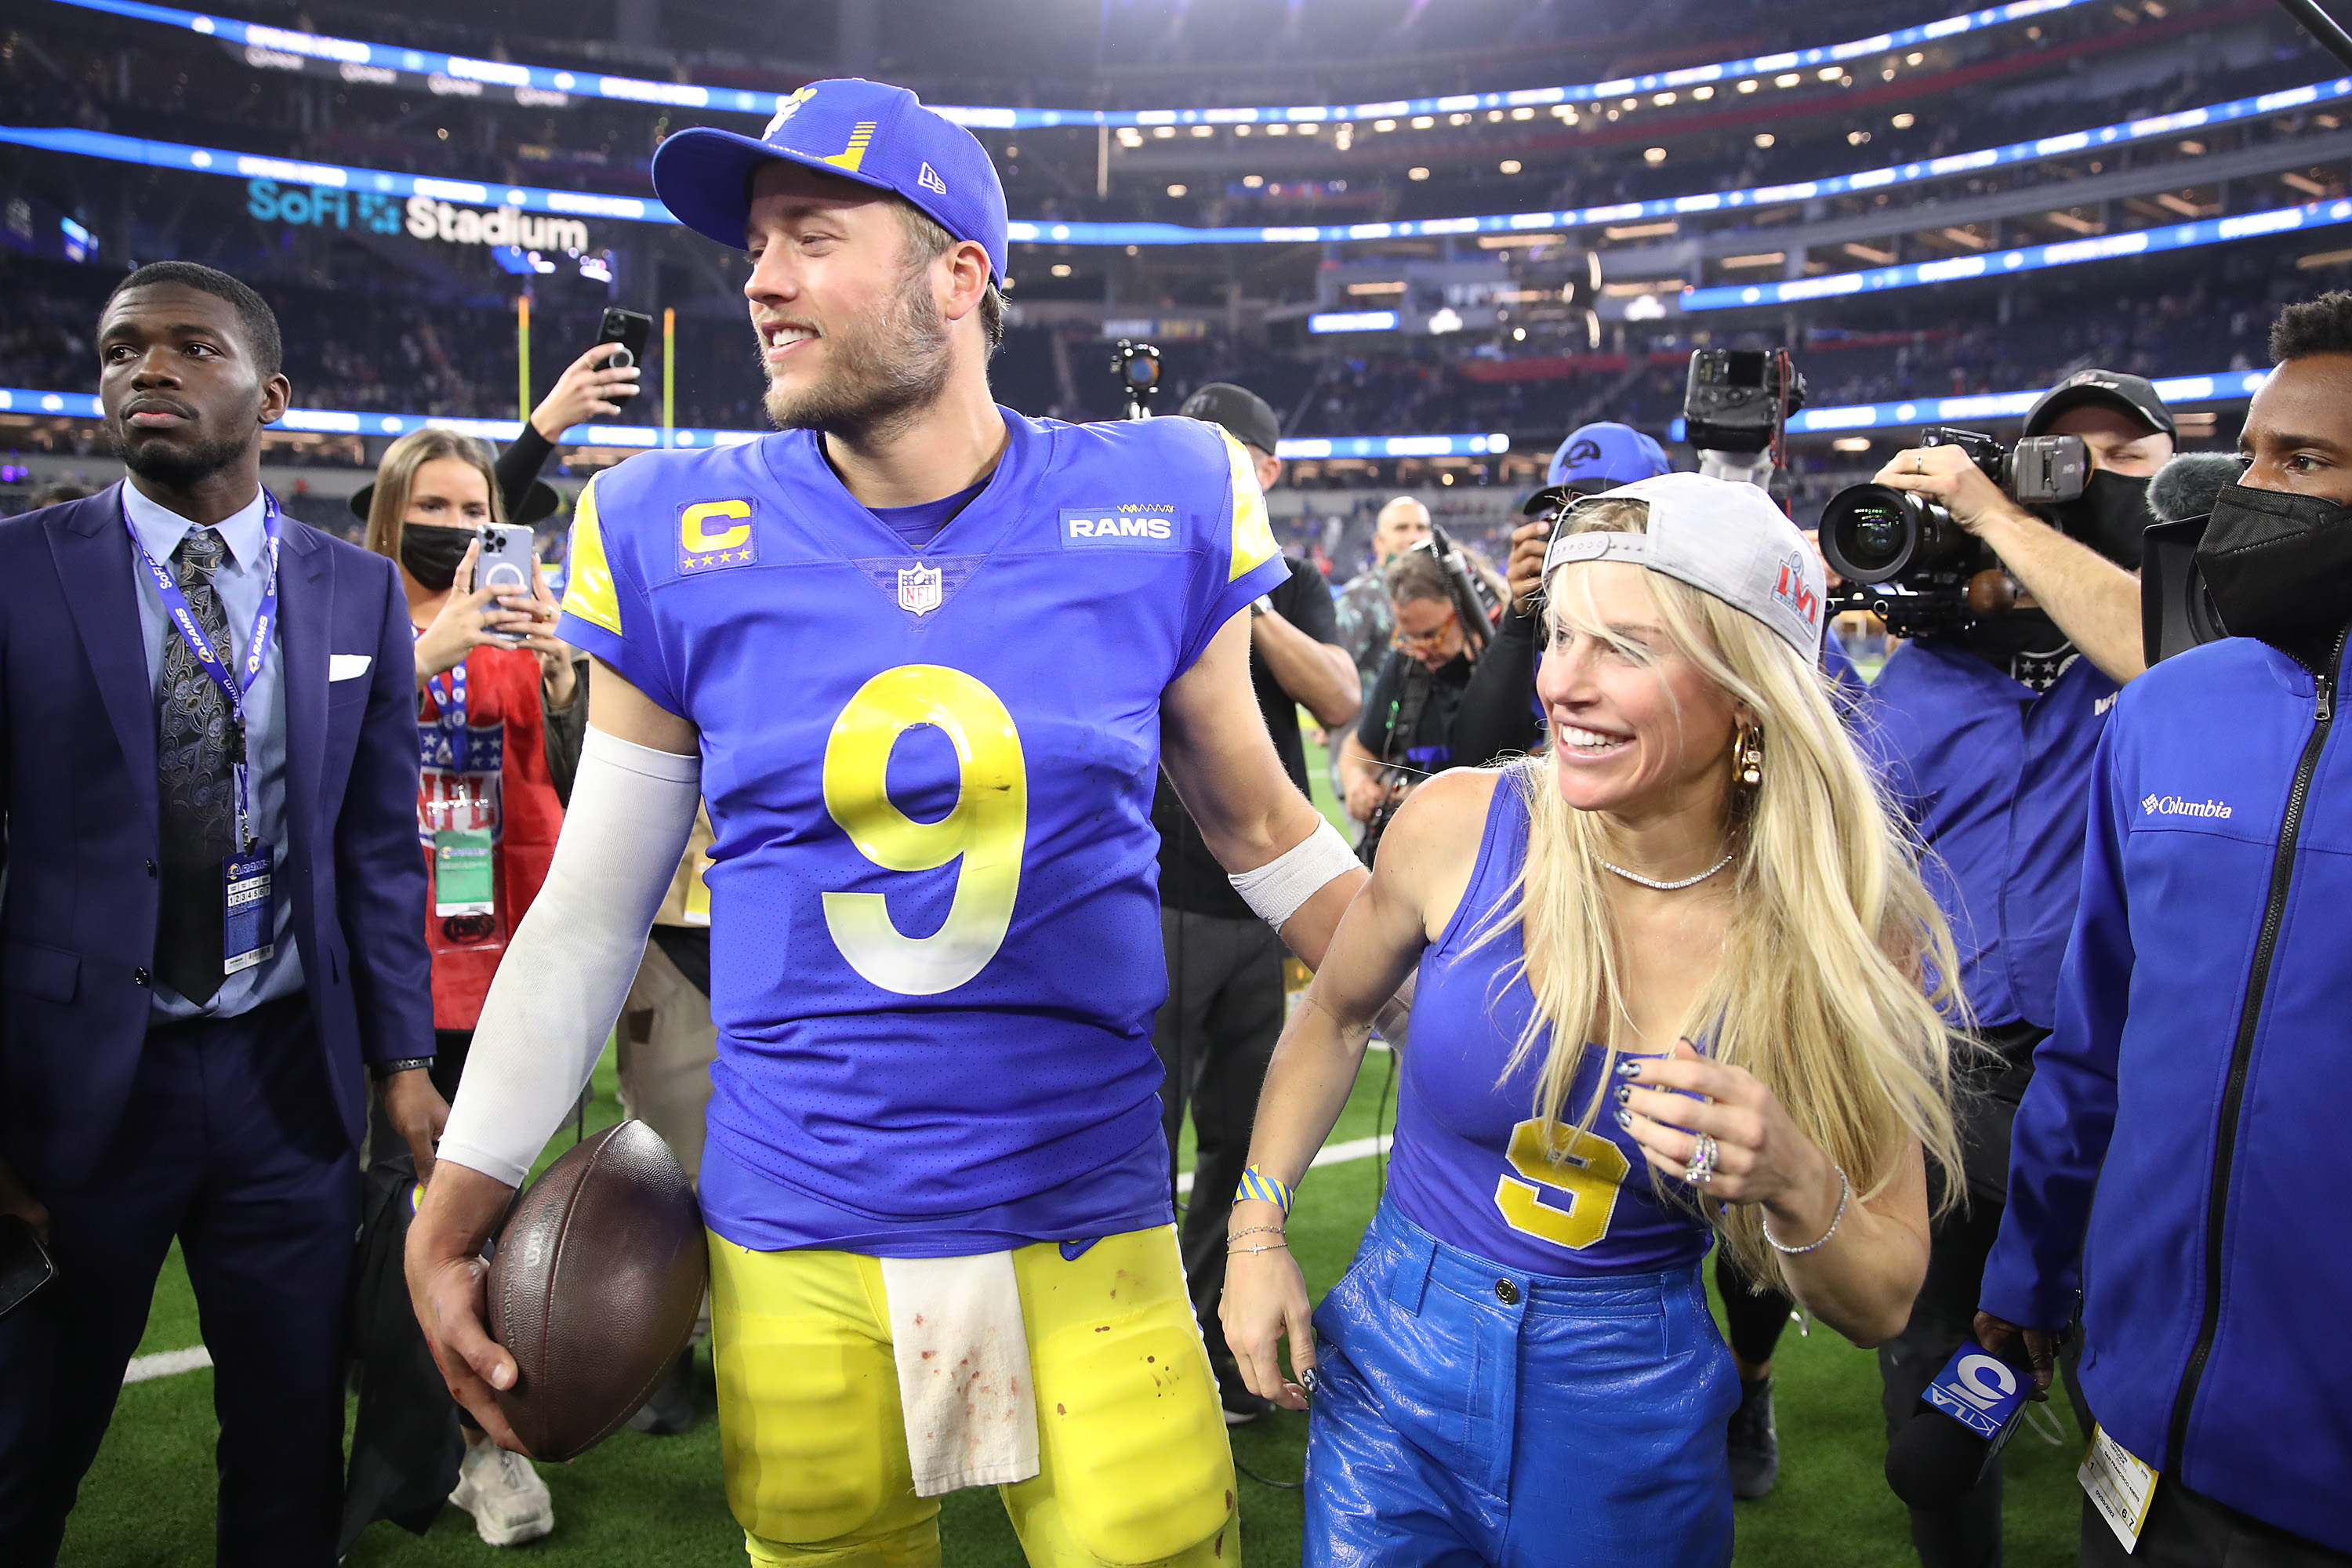 Valenti on Kelly Stafford: "Ban Her From The Stadium!!"